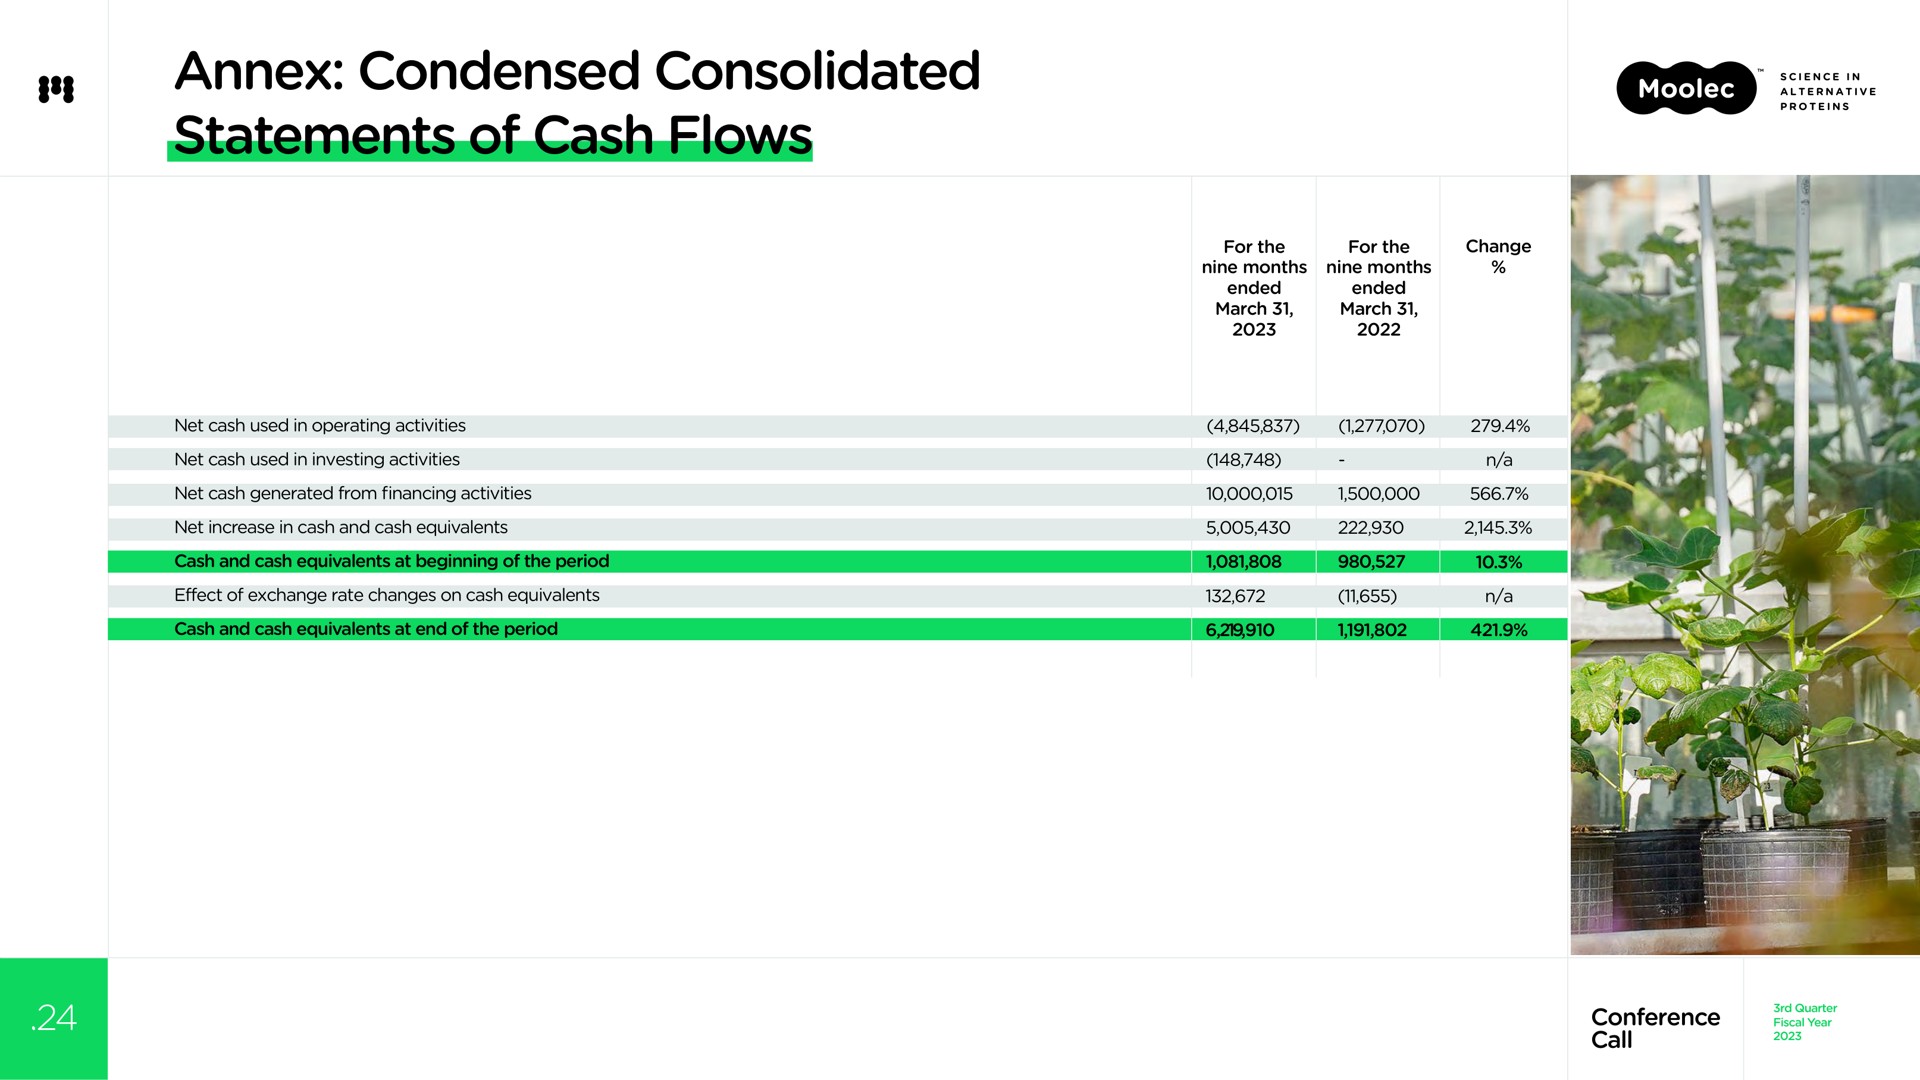 annex condensed consolidated statements of cash flows | Moolec Science